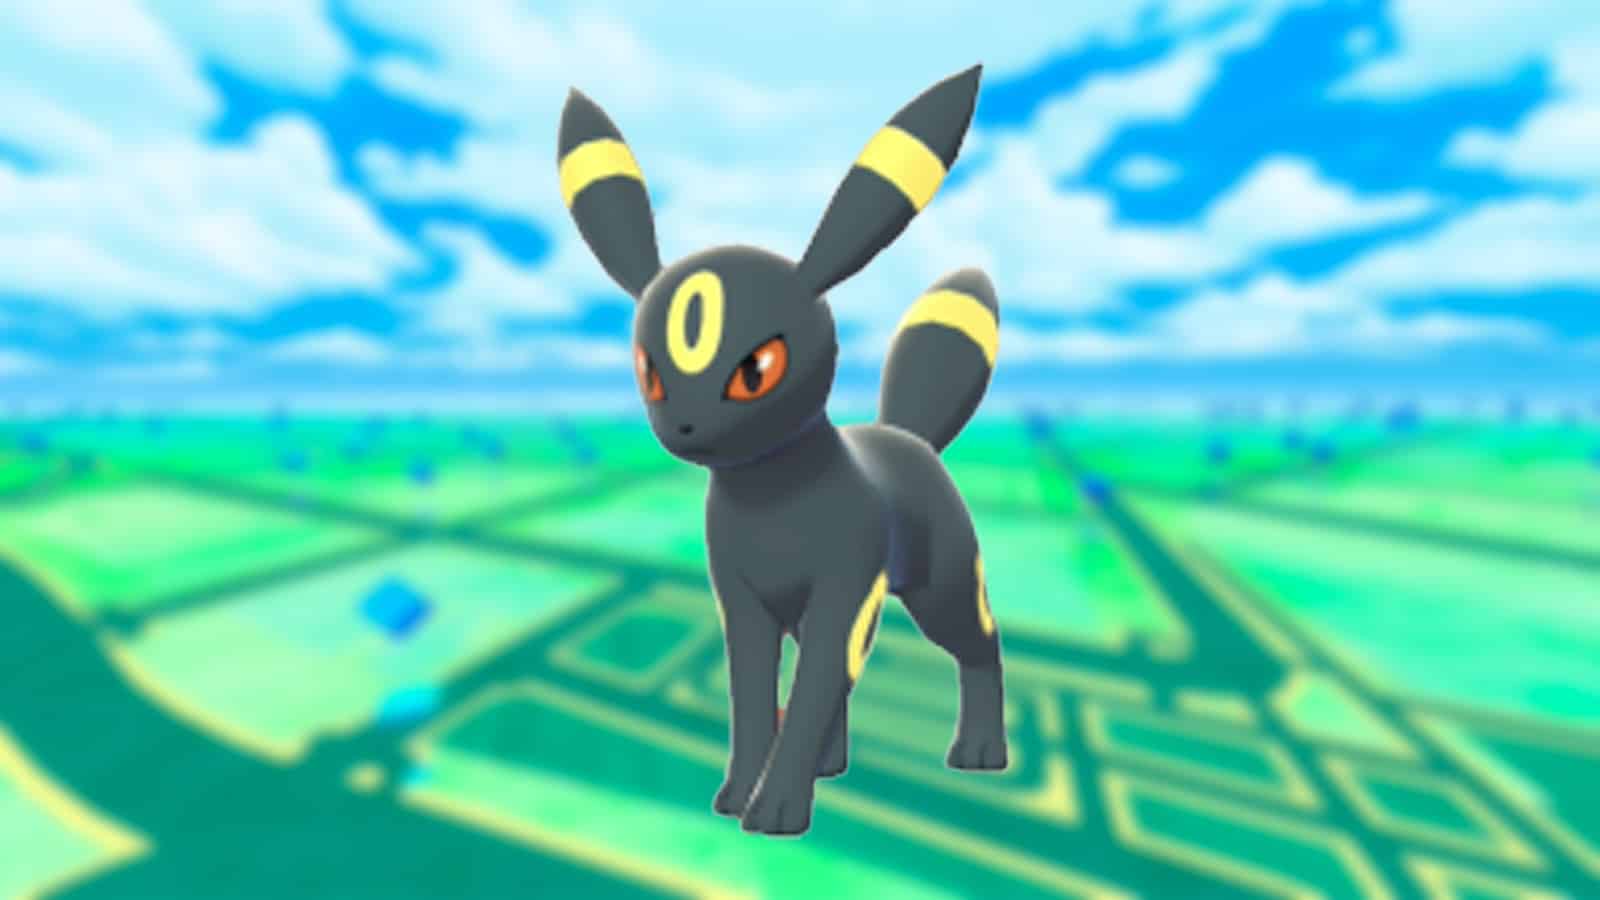 An image of Umbreon in Pokemon Go